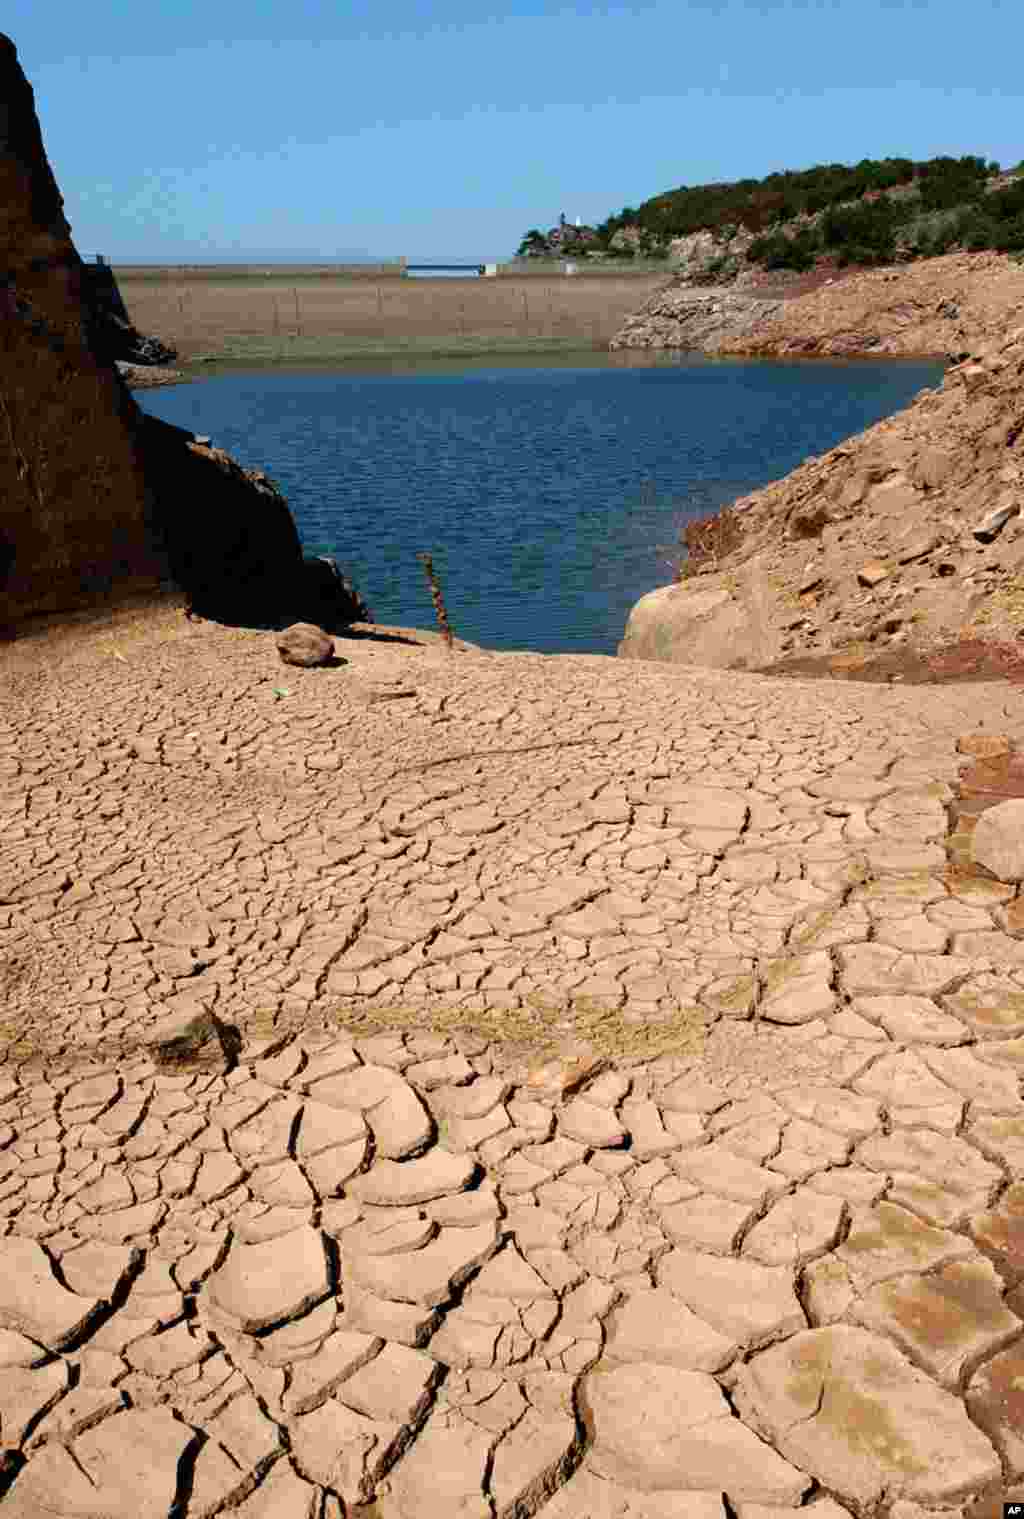 In this 2003 file photo, the Ibardin lake in southern France was almost dry due to a heat wave that killed 71,000 people, making it the most deadly heat wave in the world to date.&nbsp;